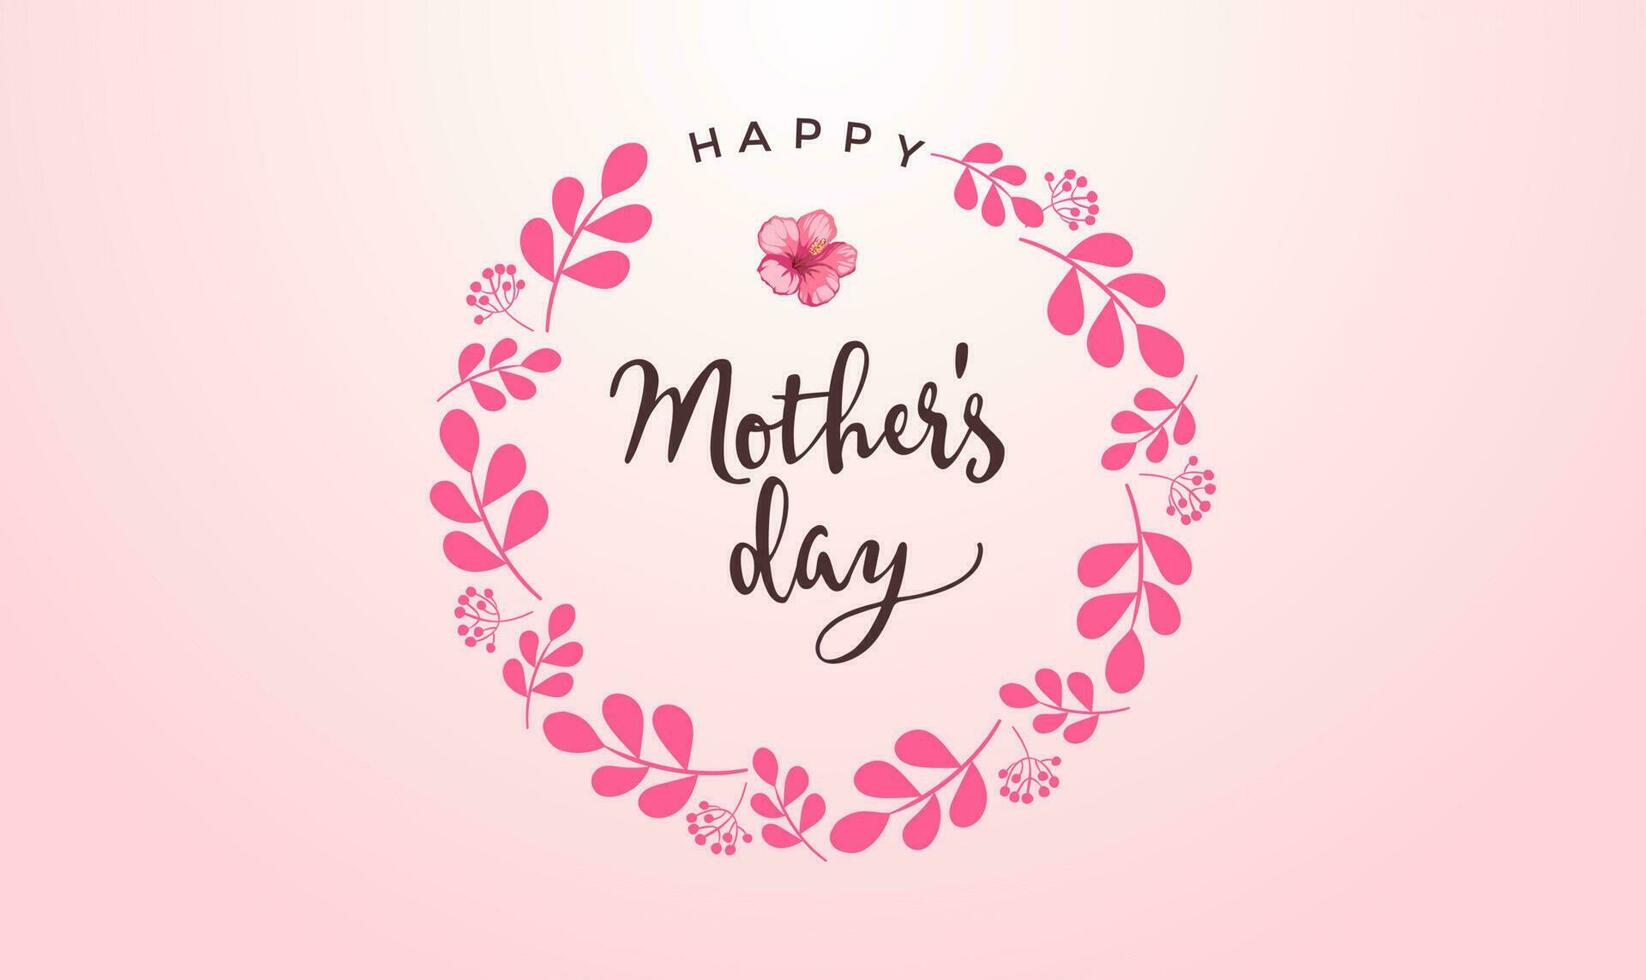 Mother's Day Background with colorful elements and flowers, lettering. Vector symbols of love in the shape of hearts for greeting card design, floral, pastel color.